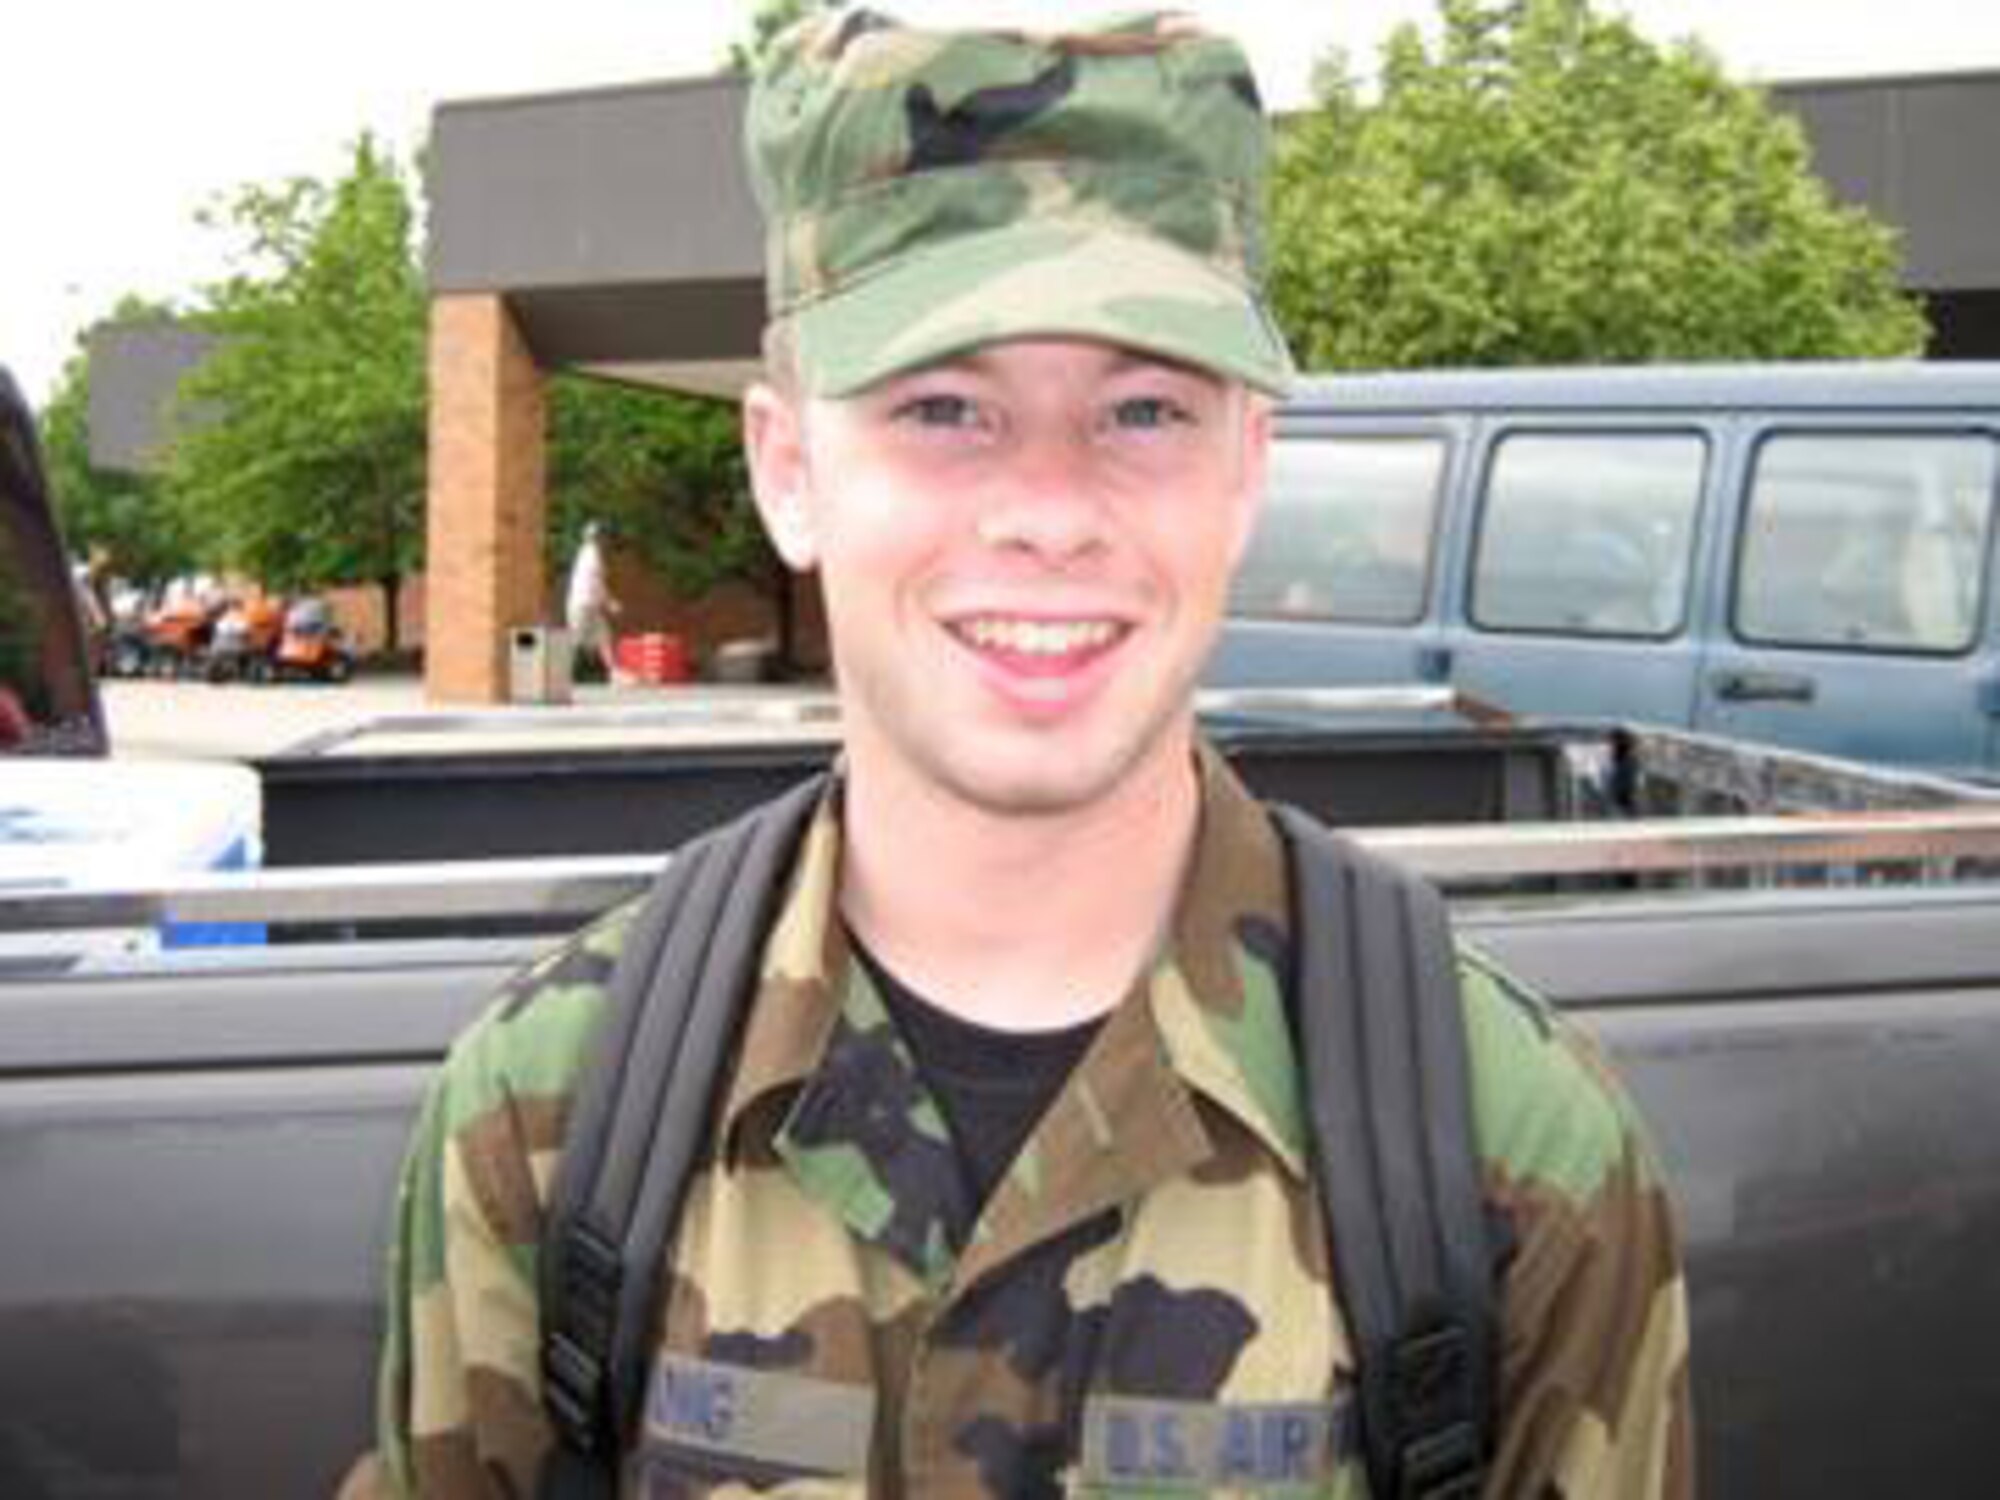 Robert Geoffrey Long was born on December 15, 1985 in Lubbock, Texas. Rob joined the USAF Reserves in 2005 and served a tour in Iraq in 2007/2008. He transitioned to the Navy Reserves where he became a Corpsman. (U.S.Air Force/ Courtesy Photo)